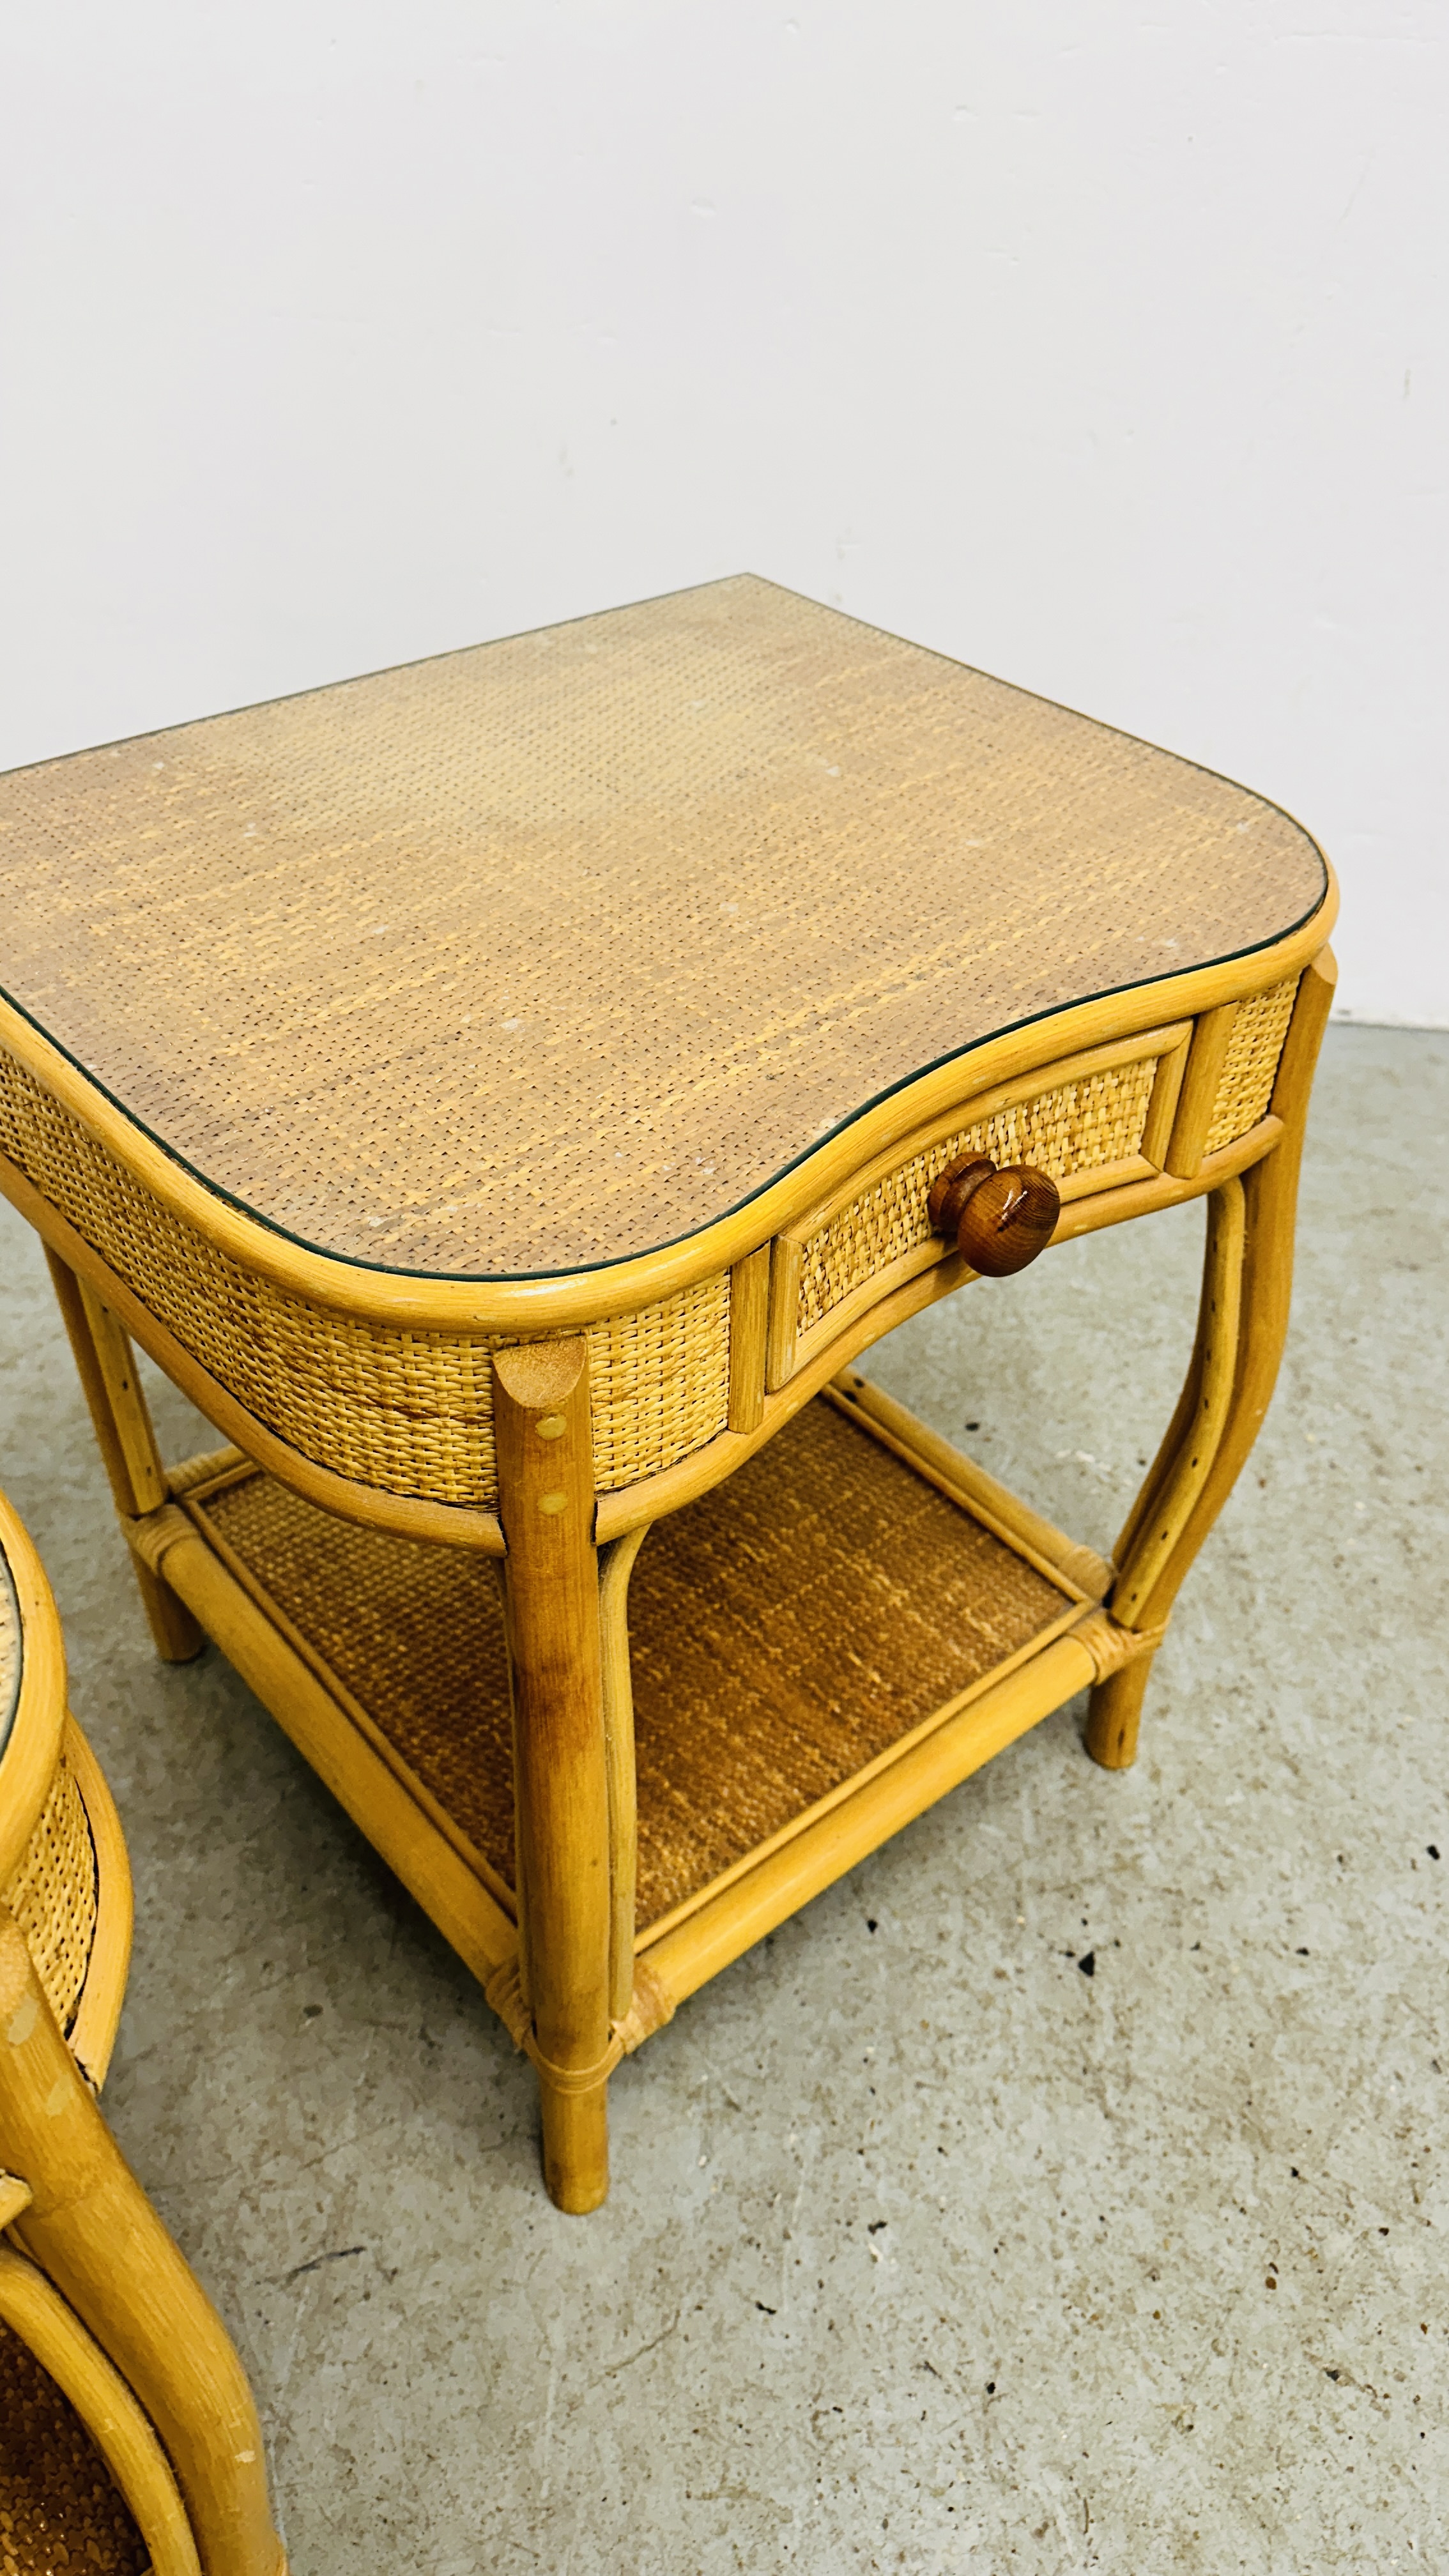 A PAIR OF WICKER SINGLE DRAWER BEDSIDE CABINETS WITH GLASS TOPS. - Image 7 of 8